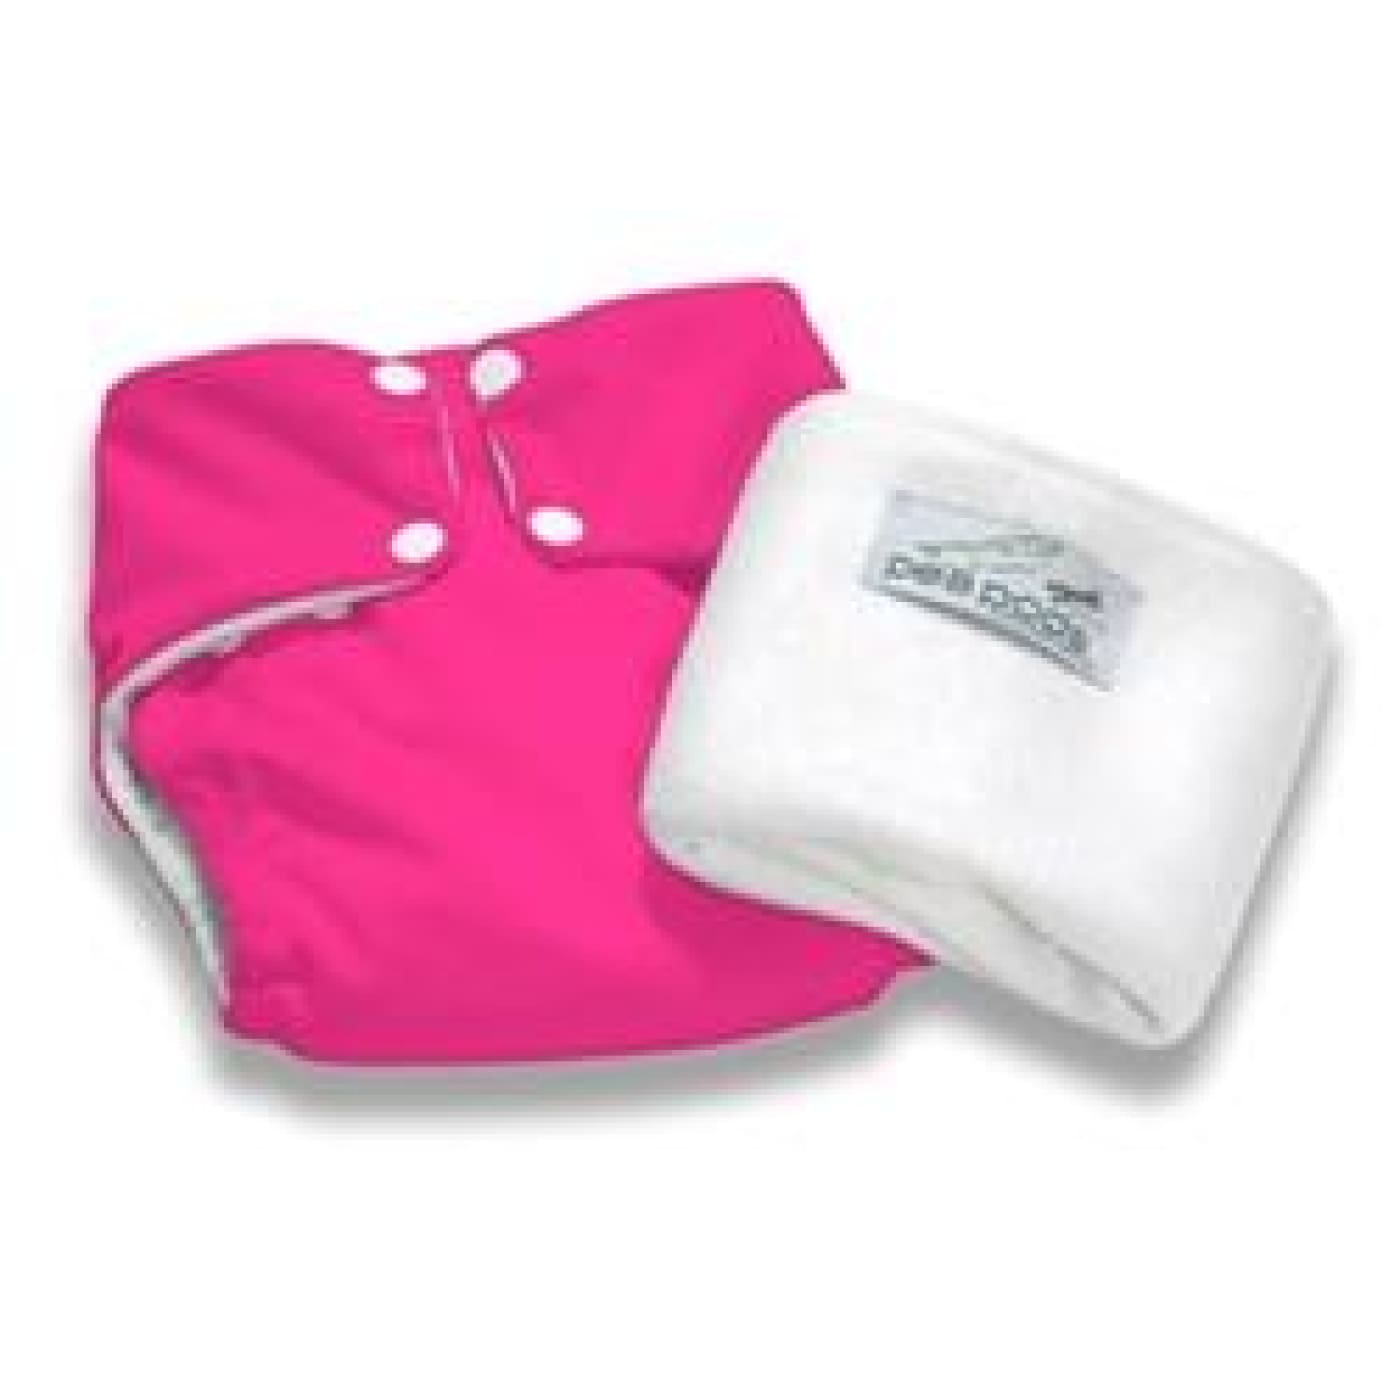 Pea Pods One Size Fits All Nappy - Hot Pink - BATHTIME & CHANGING - NAPPIES/WIPES/ACC ECO RANGE